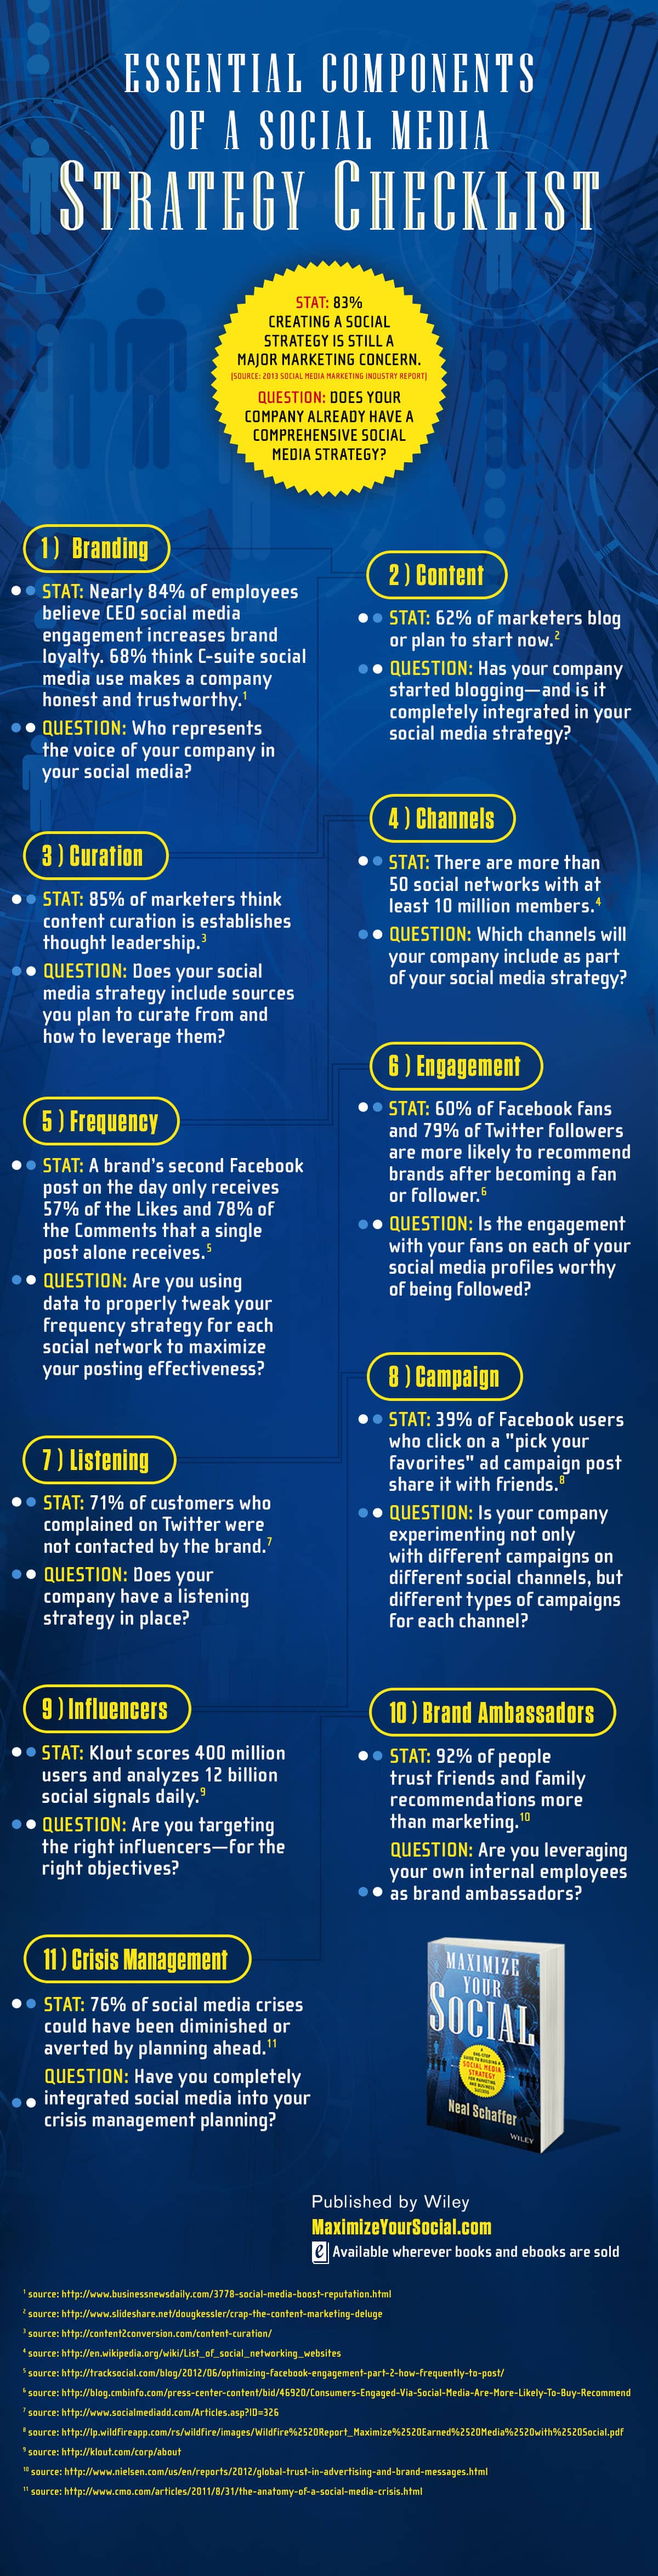 social media strategy infographic